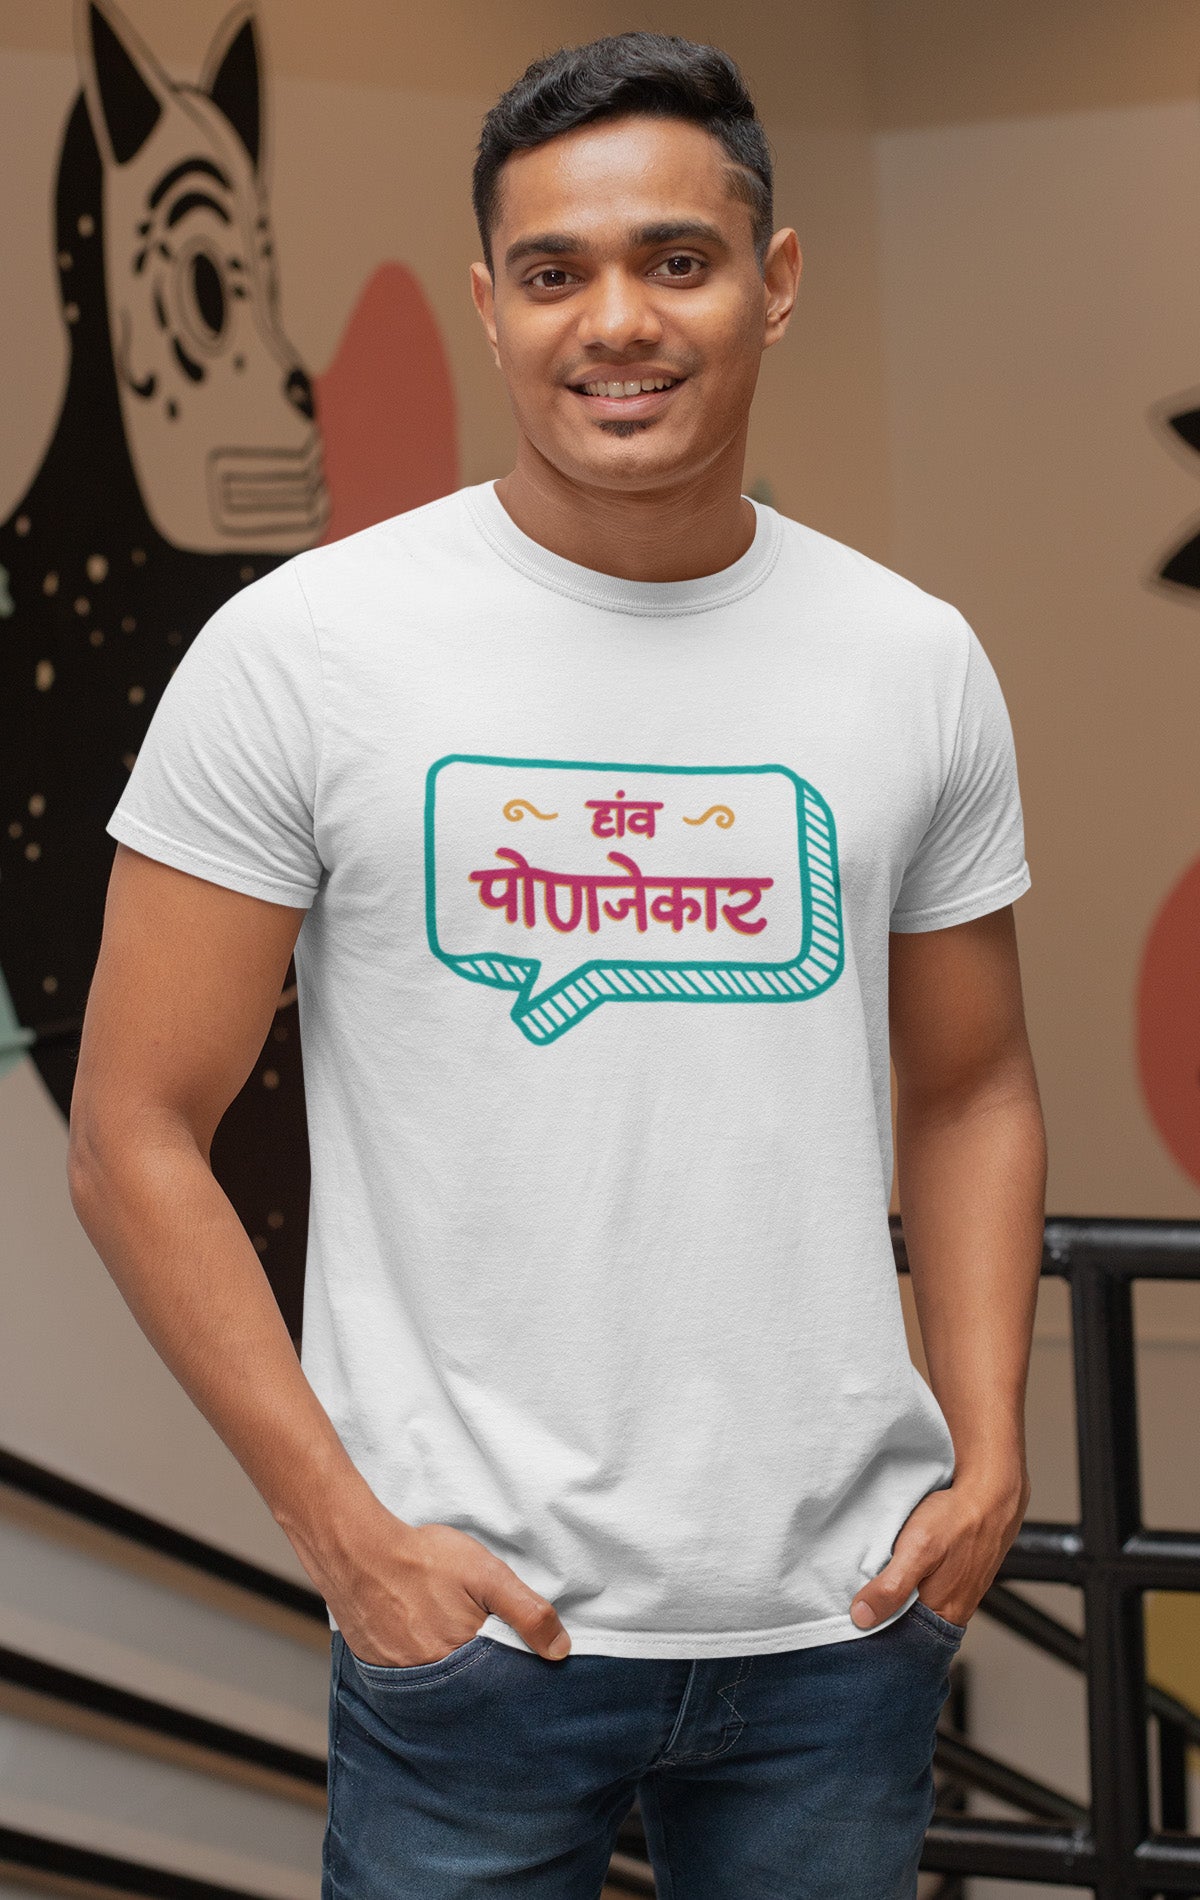 The Goenkaar series 📍  Are you a 'ponjekaar' & are proud of being one? ✨  Then behold you Panjim peeps- this tee is waiting for you 🤪  Grab your 'ponjekaar' tee only available at Oipatrao